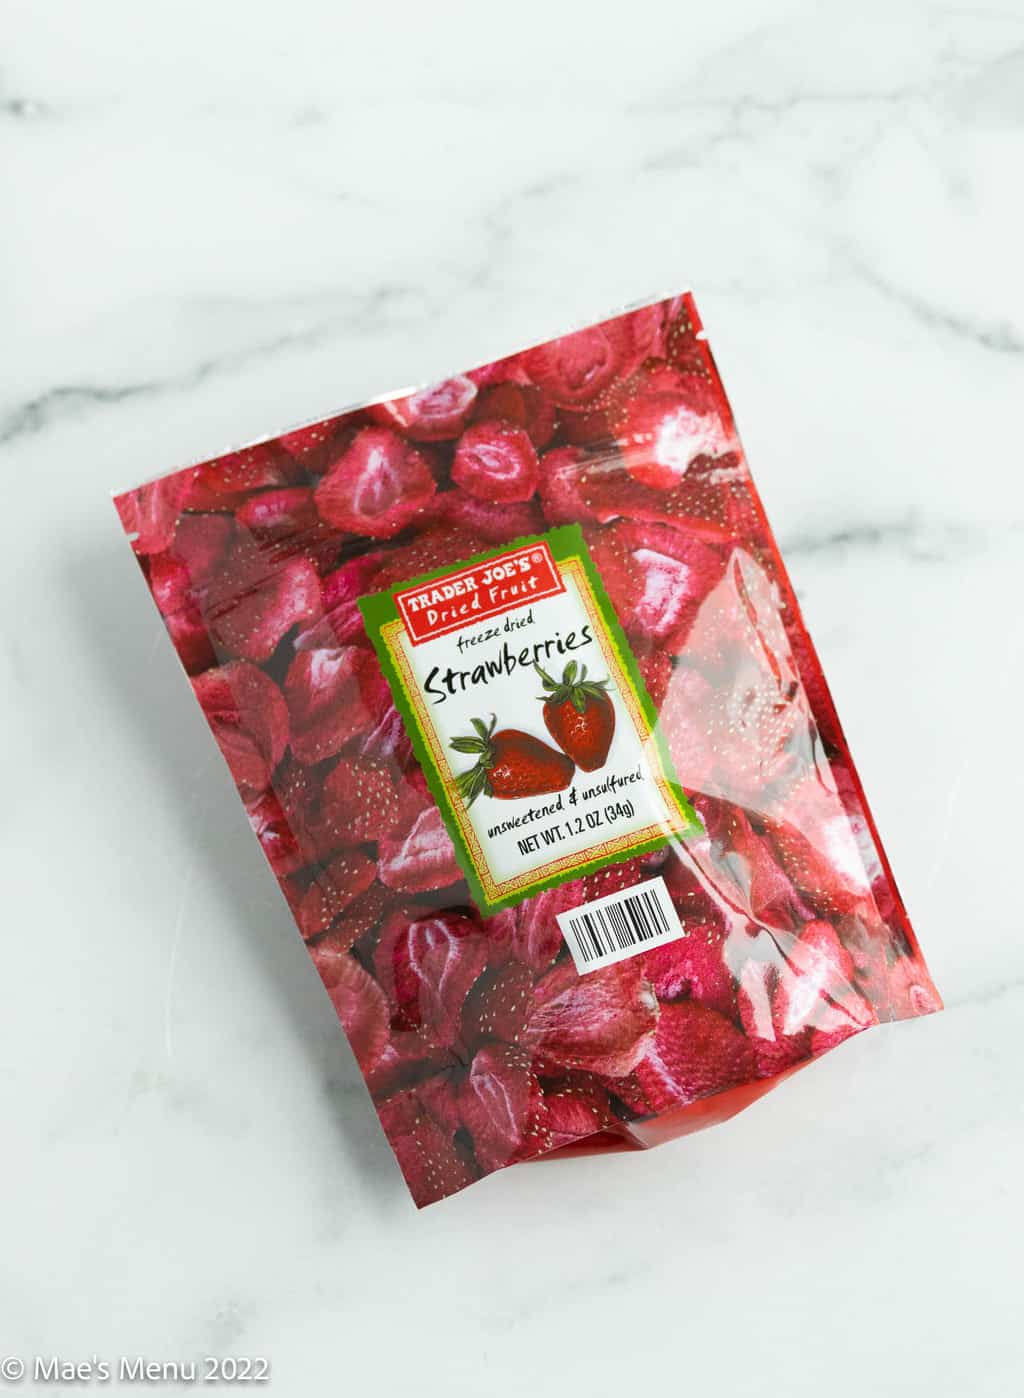 A pack of trader joe's freeze dried strawberries.